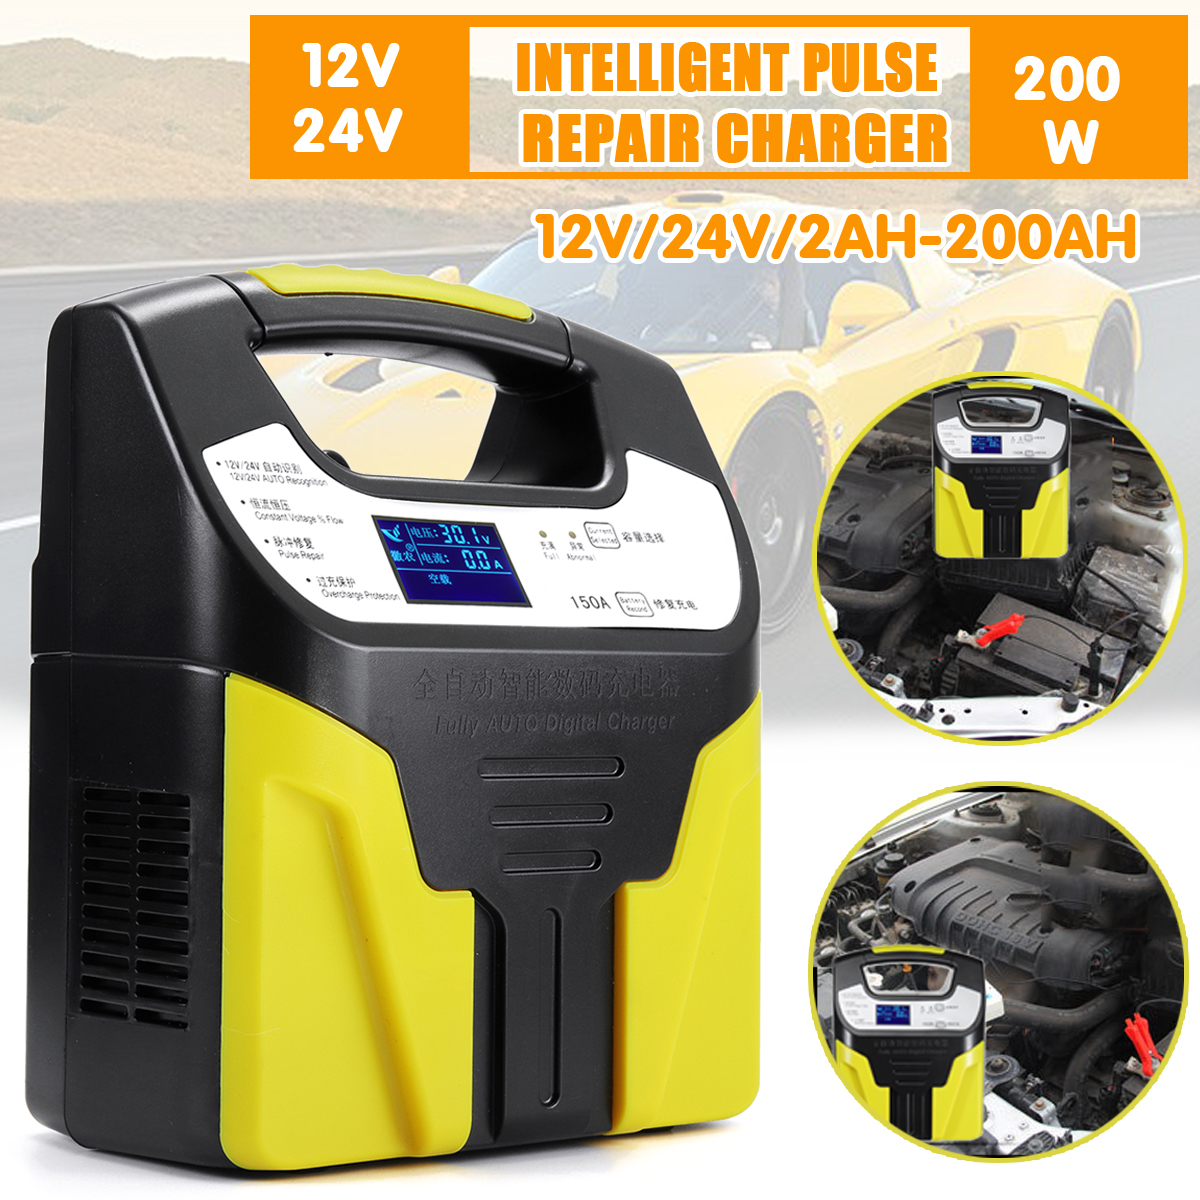 220V-200W-Digital-Full-Automatic-Electric-Battery-Charger-Intelligent-Pulse-Repair-1387859-2